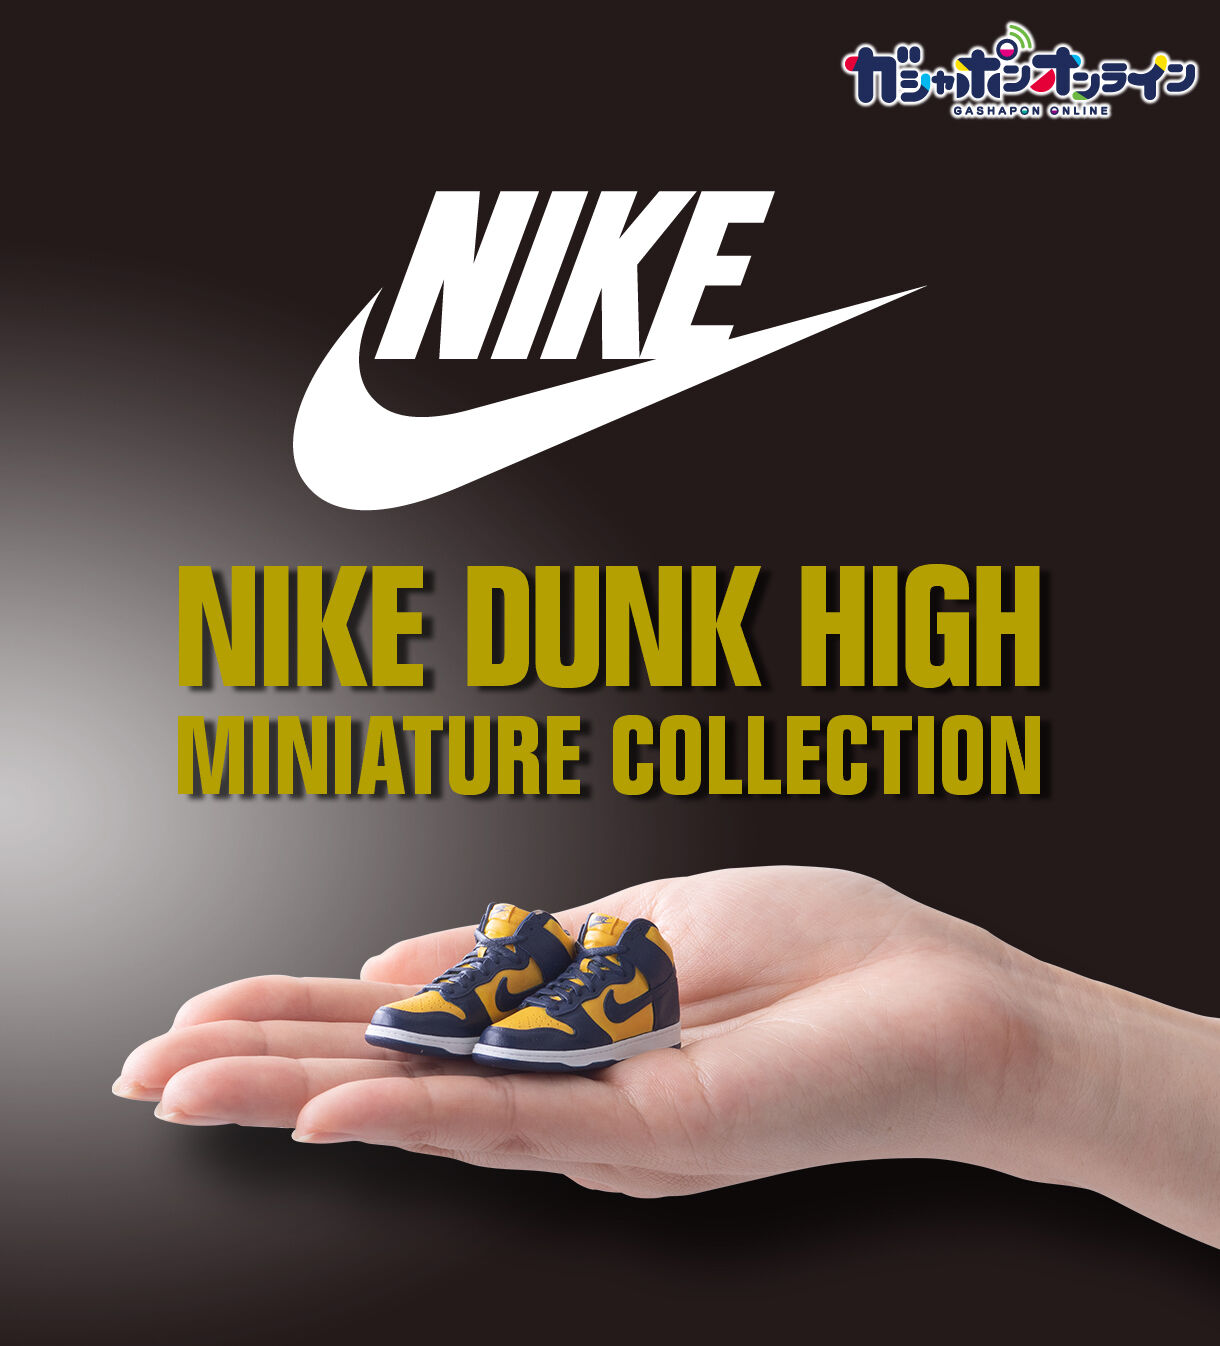 NIKE DUNK HIGH miniature collection | 趣味・コレクション 